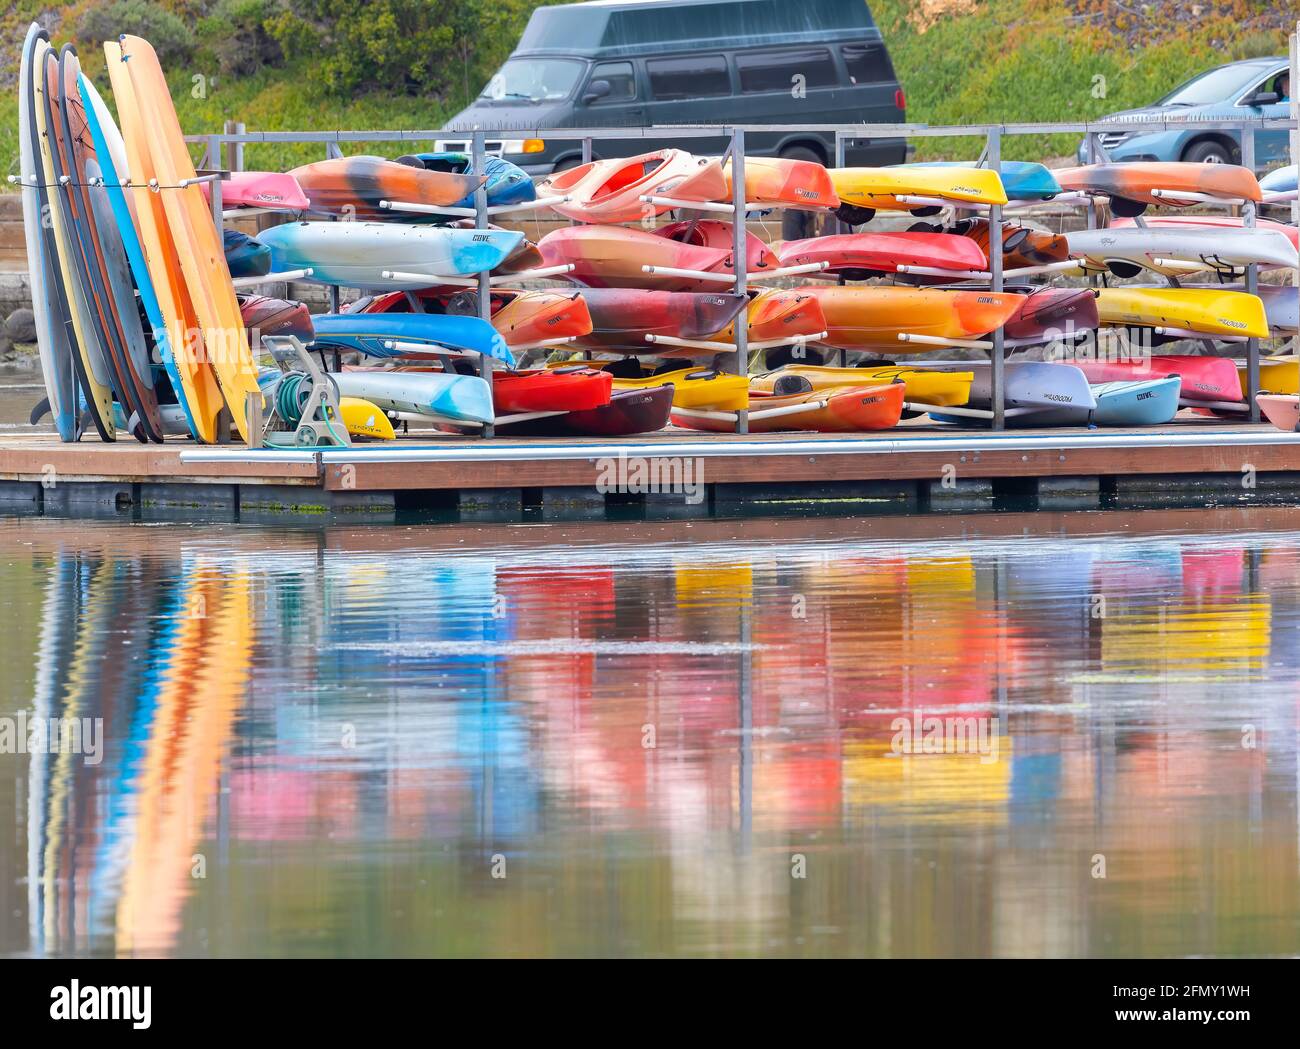 Rental Kayaks Stacked Multiple Colors Stock Photo